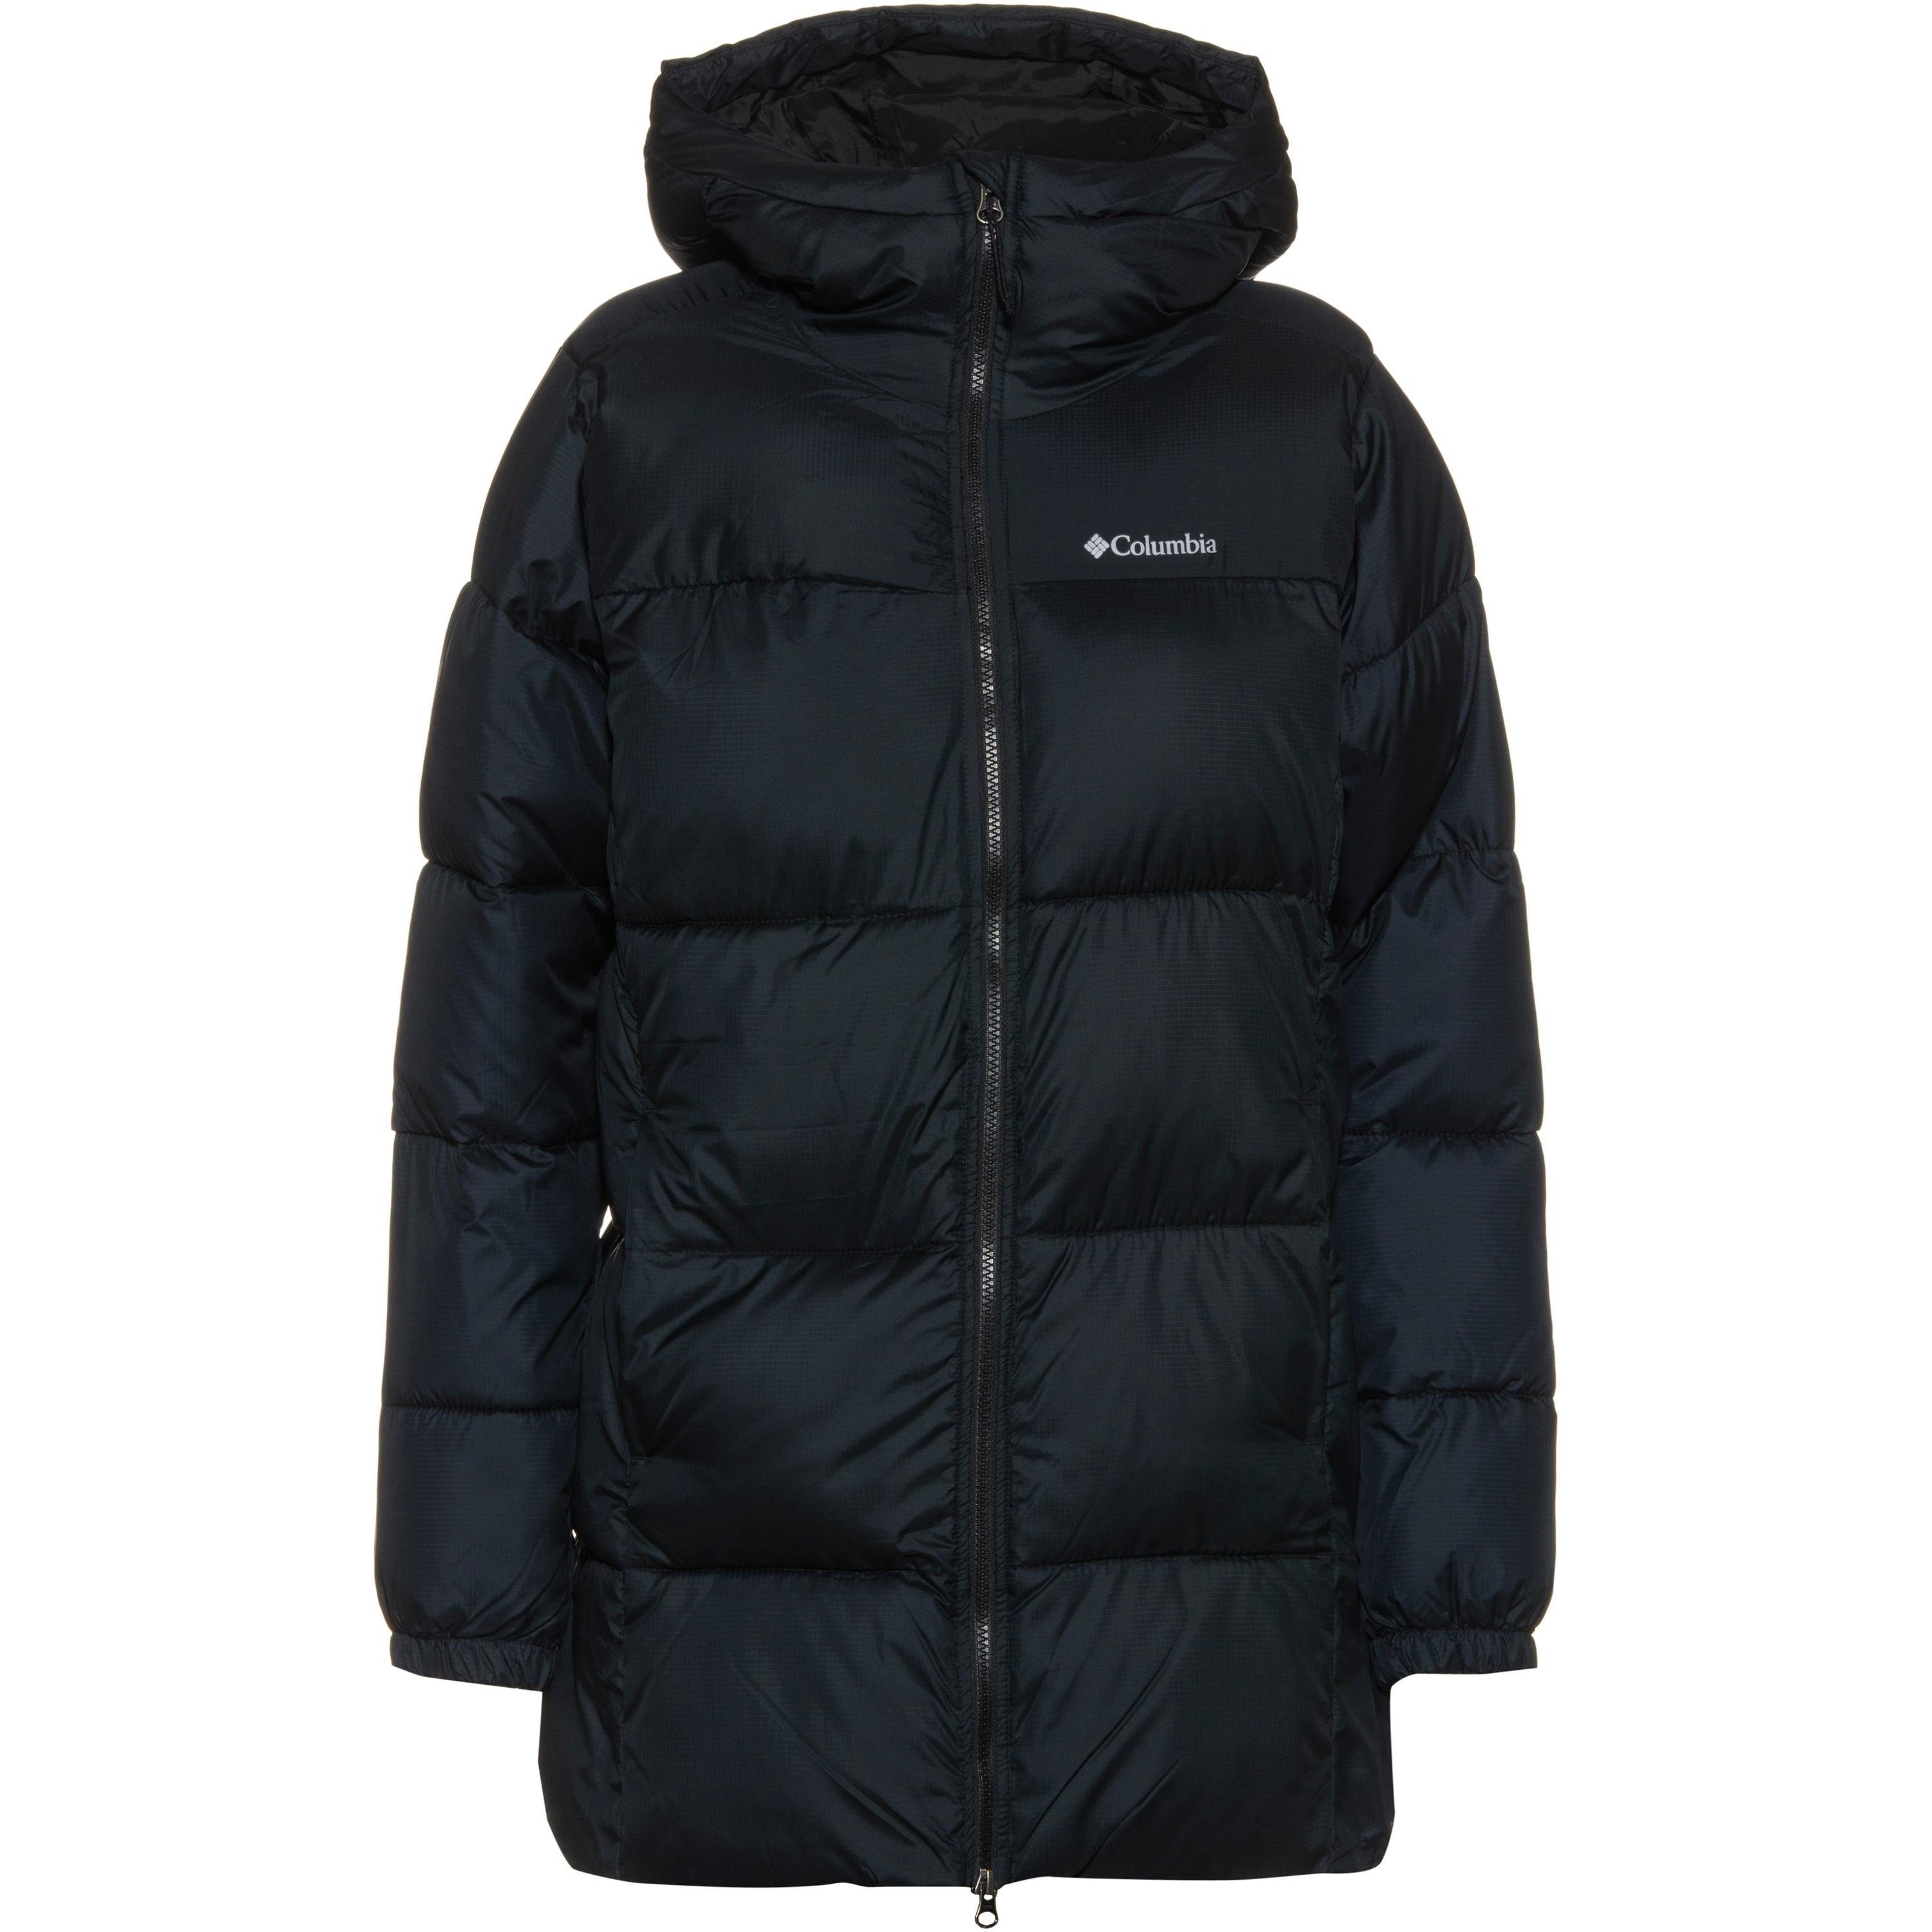 Columbia Steppjacke Puffect Mid Strapazierfähig Hooded Jacket